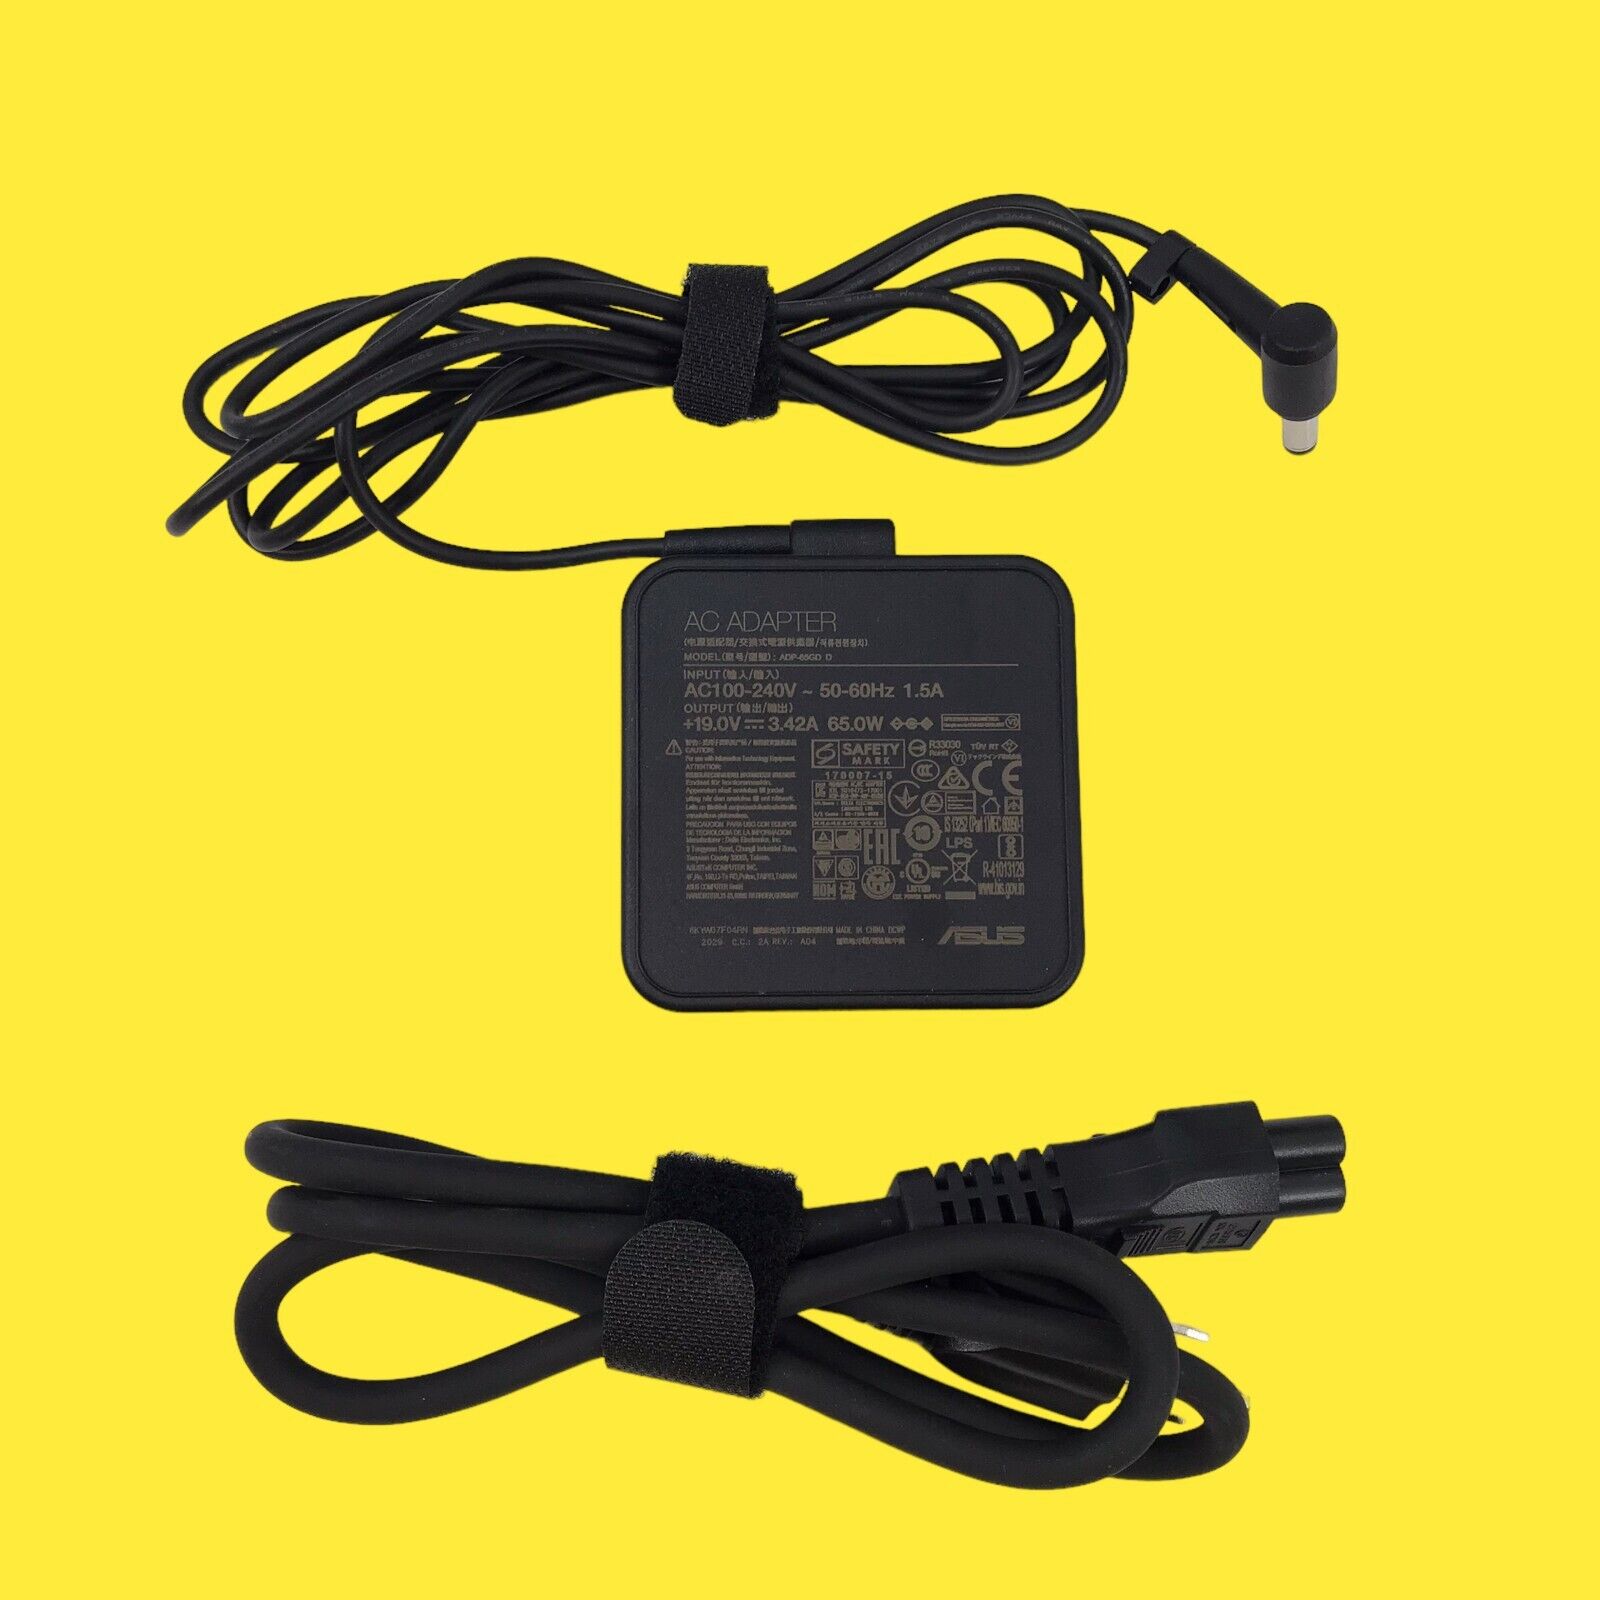 OEM ASUS ADP-65GD D 19V 3.42A 65W AC Adapter Charger for ExpertBook #2881 z64b15